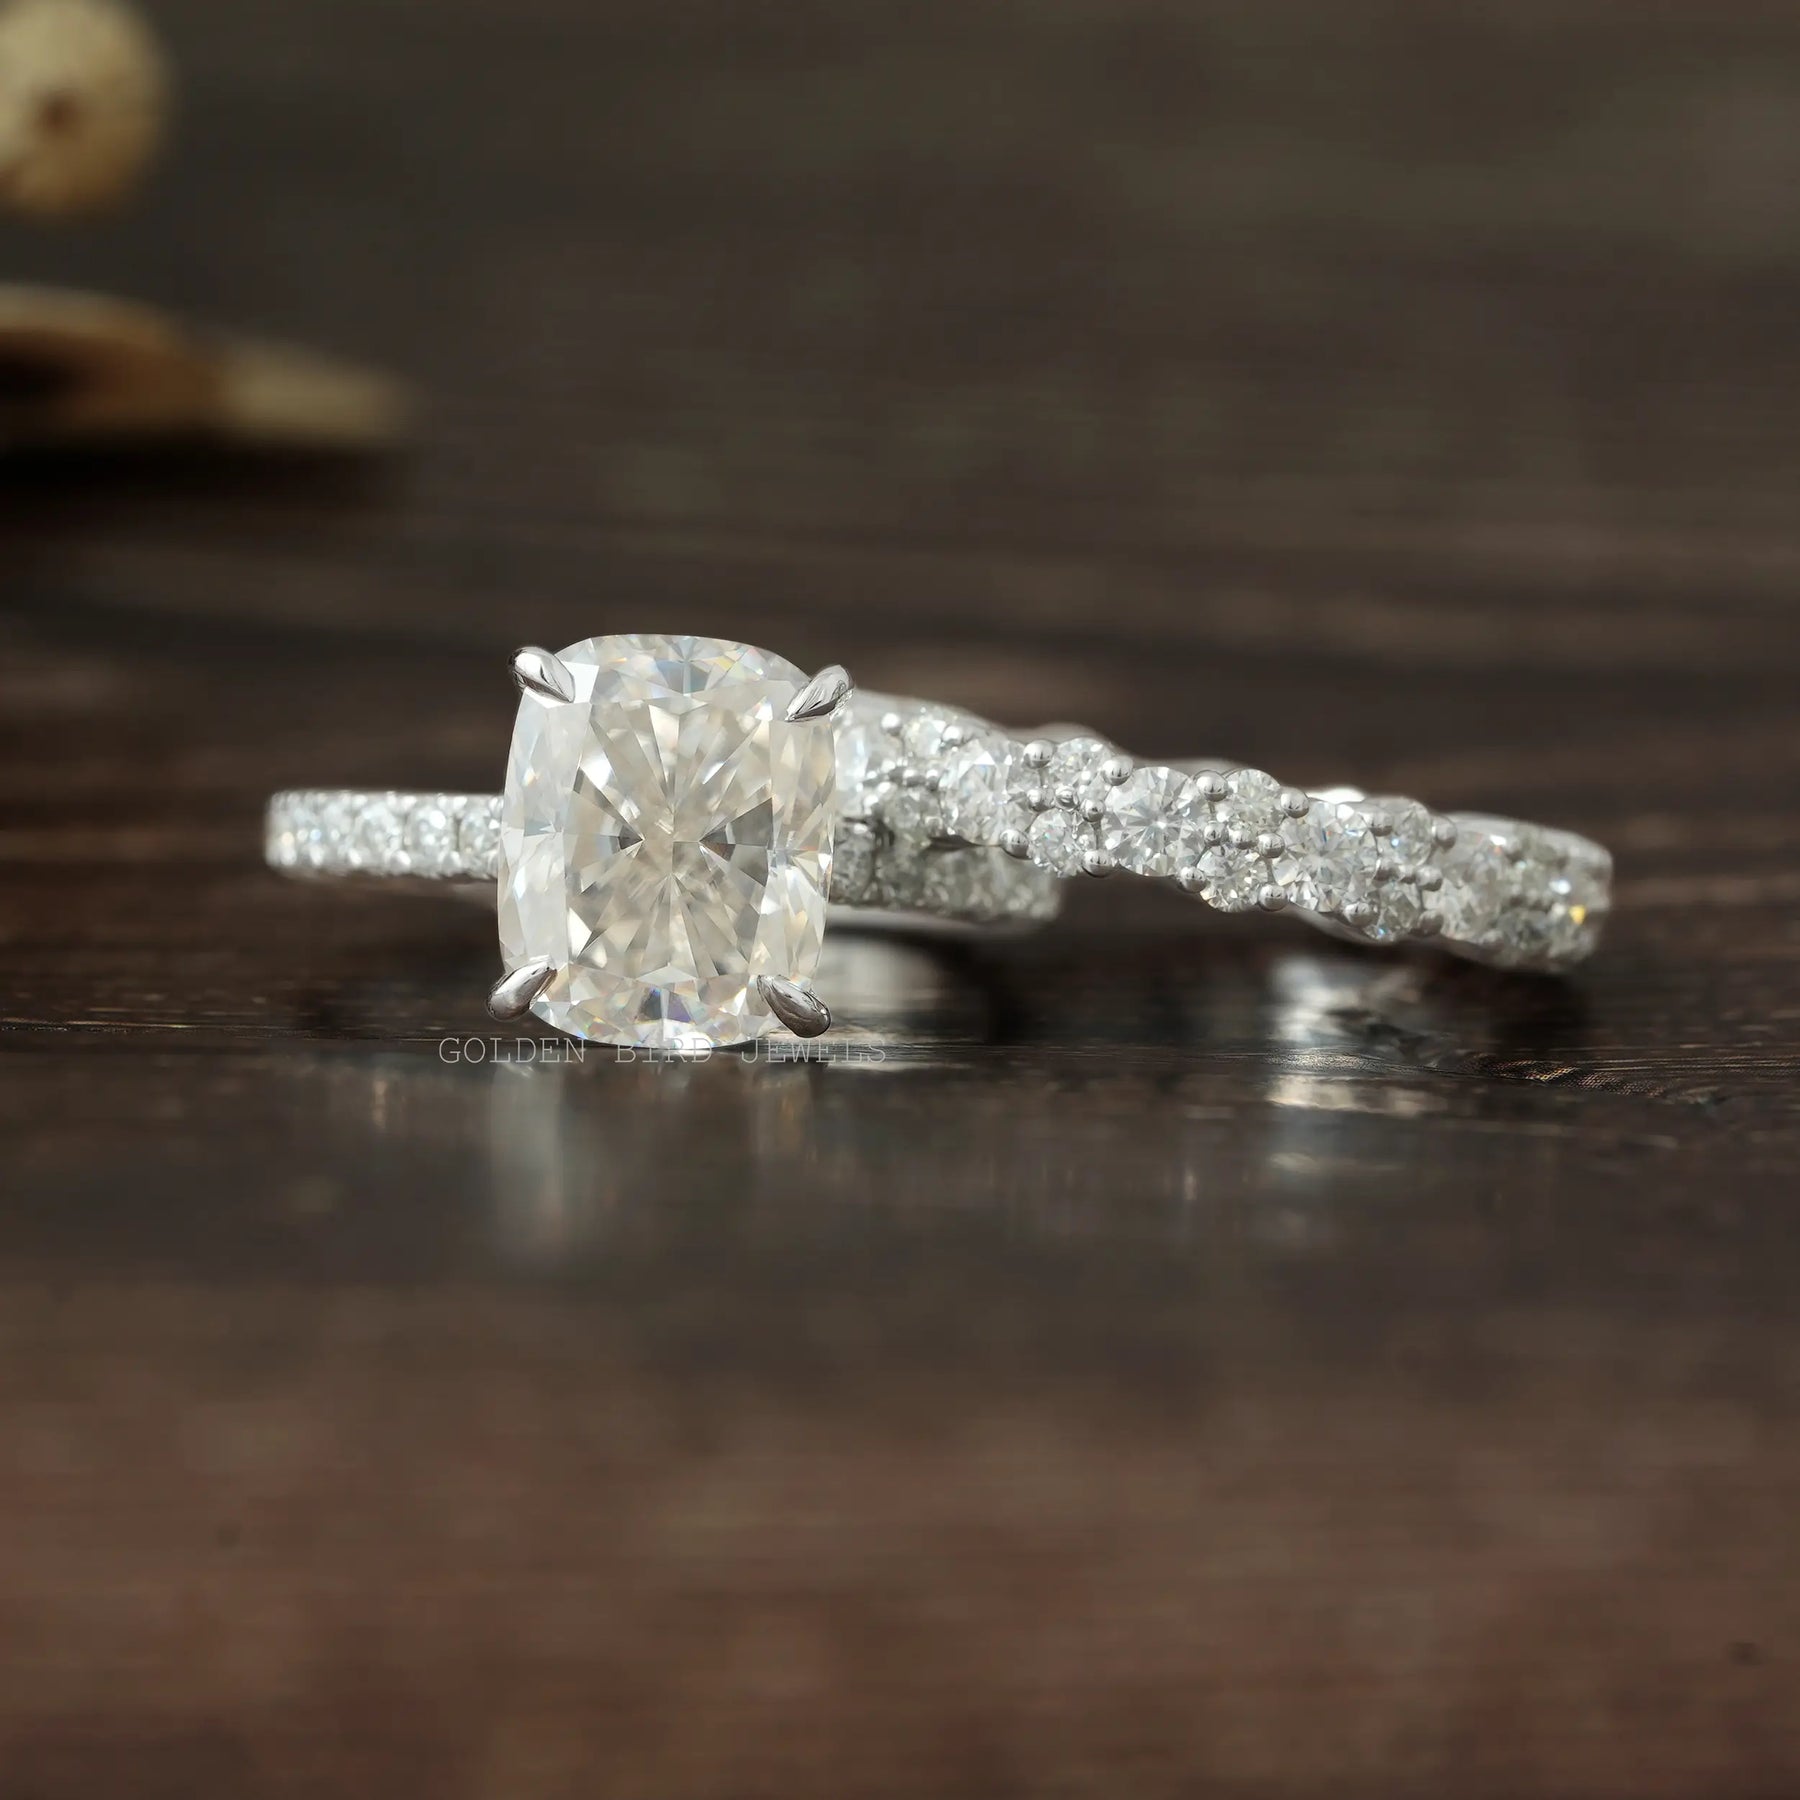 [Moissanite Cushion Cut Hidden Halo Ring Crafted With 4 Prongs]-[Golden Bird Jewels]-[Golden Bird Jewels]